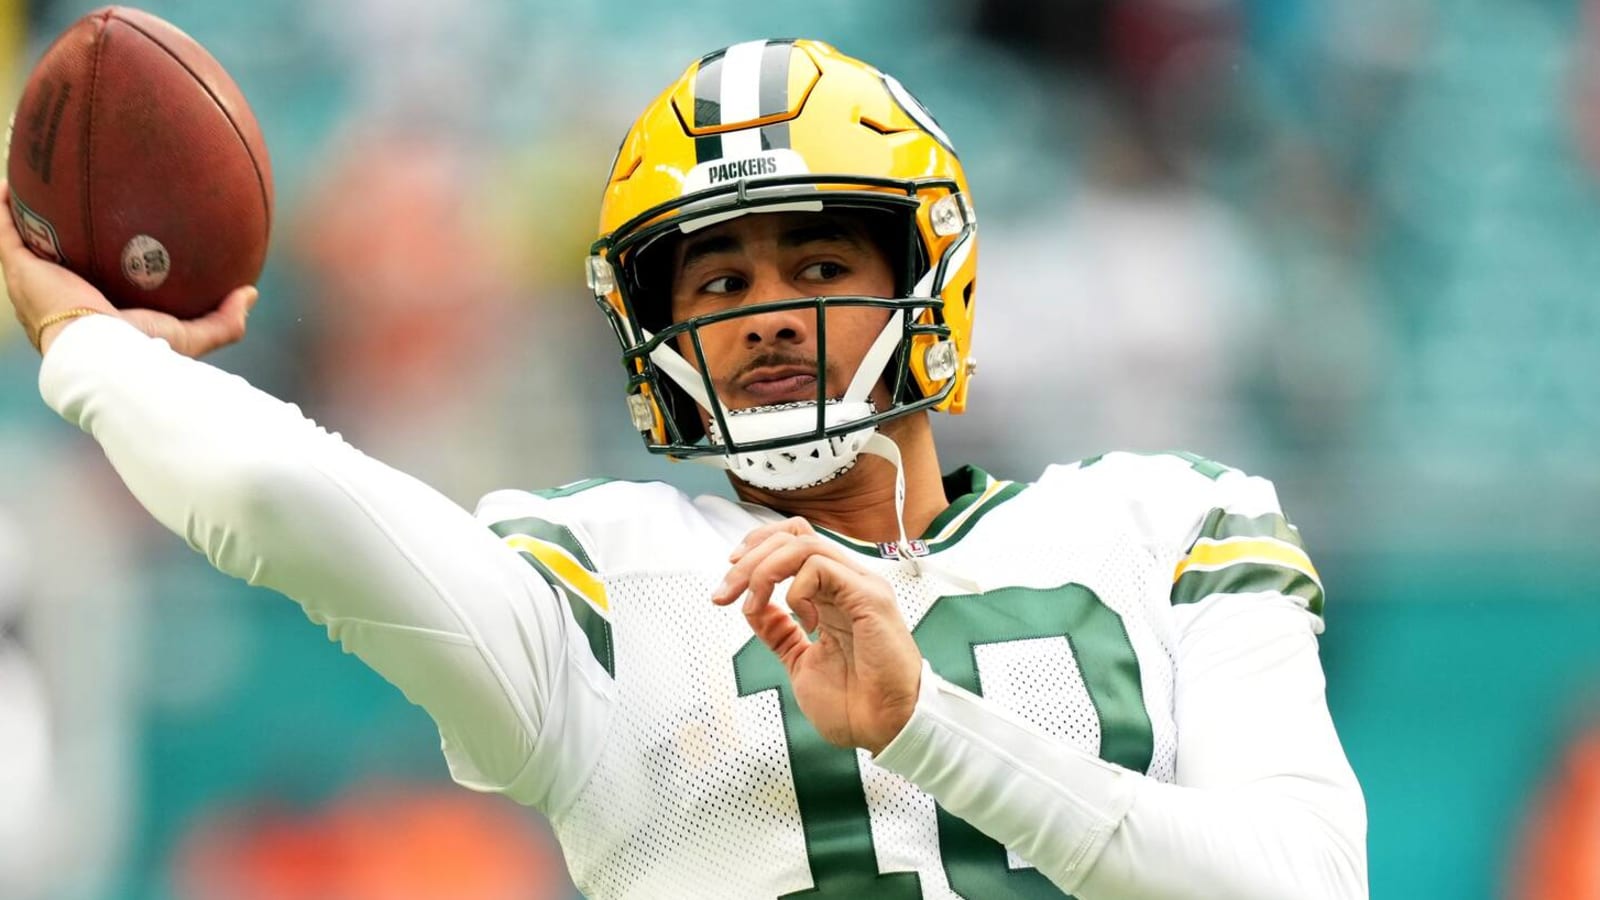 Jordan Love: 'Sky's the limit' for Packers offense